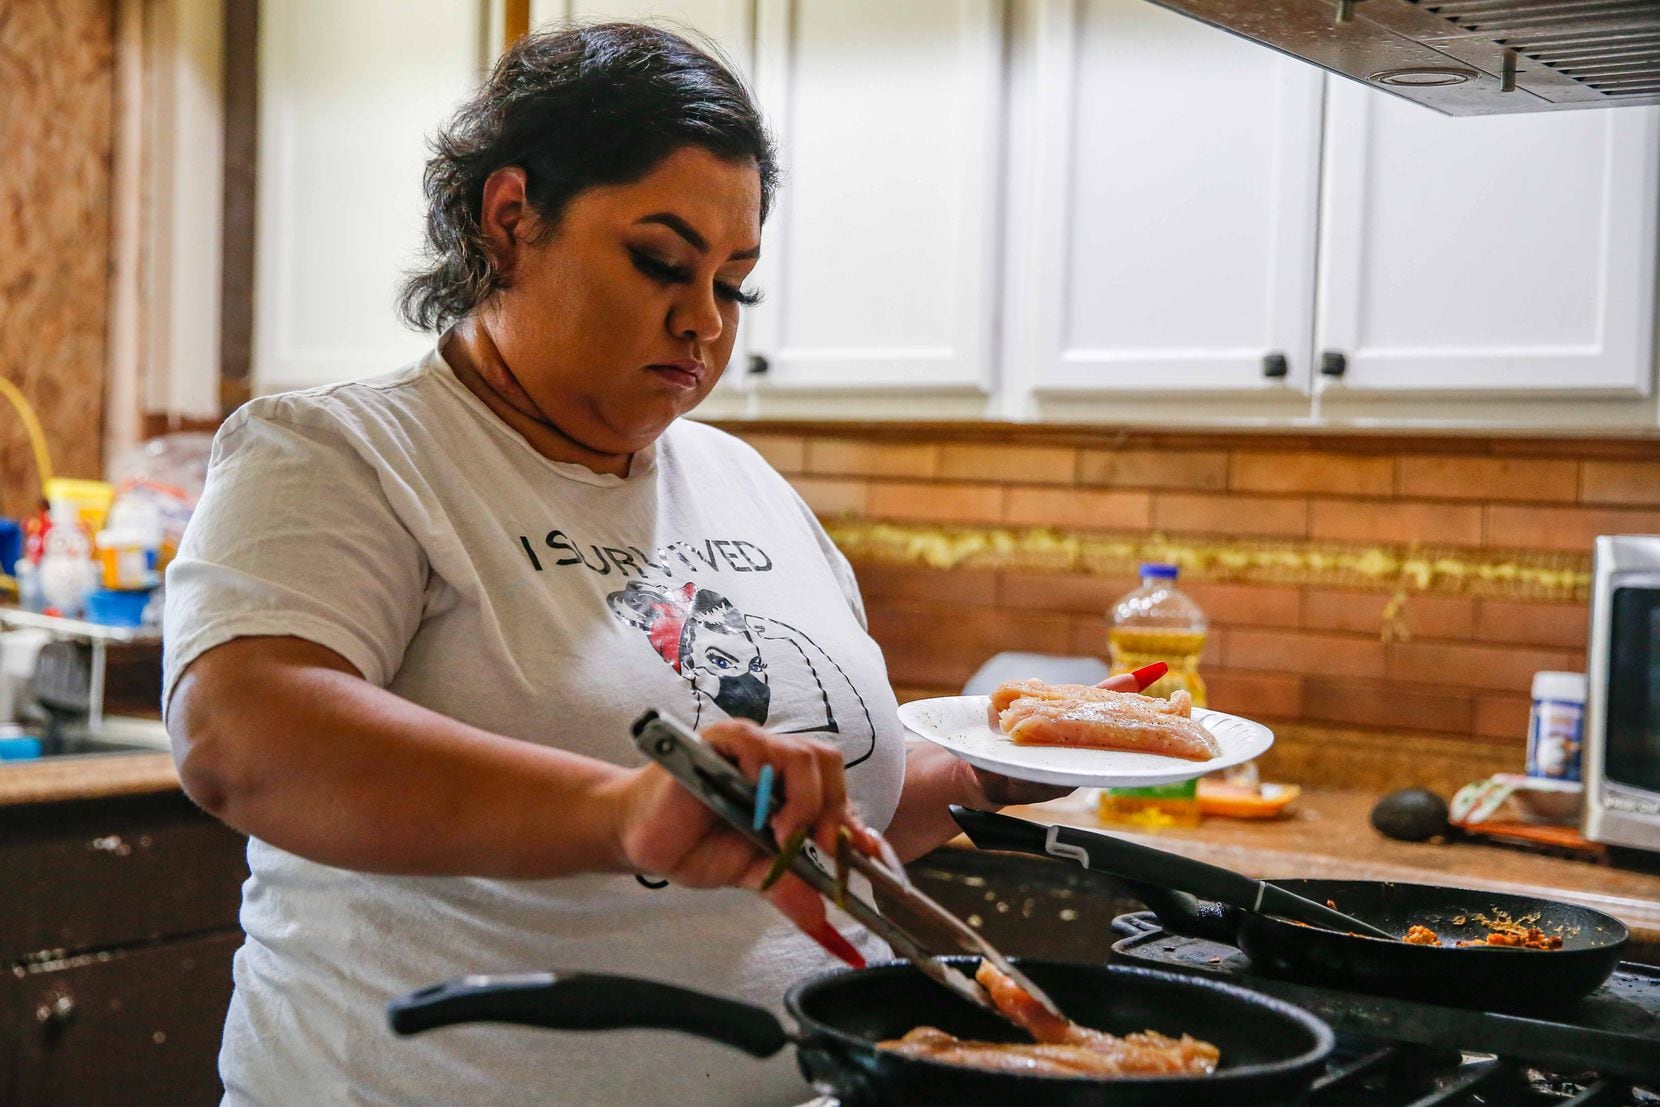 Veloz prepares lunch for her son at their home in Grand Prairie on Dec. 10, 2020.